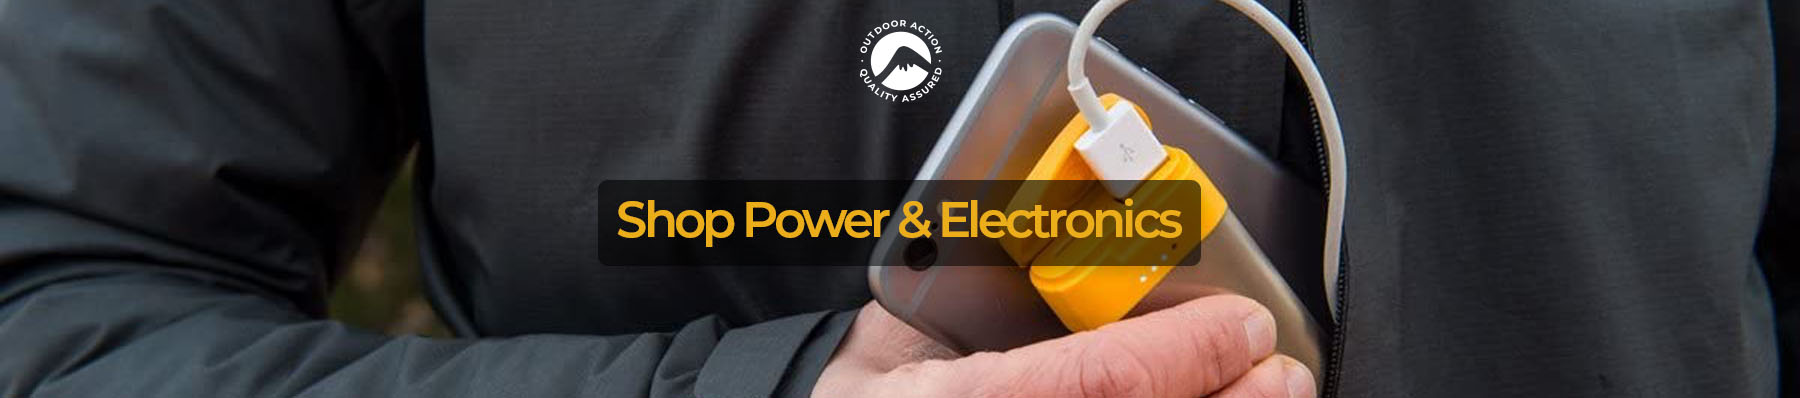 Shop Power & Electronics online at Outdoor Action